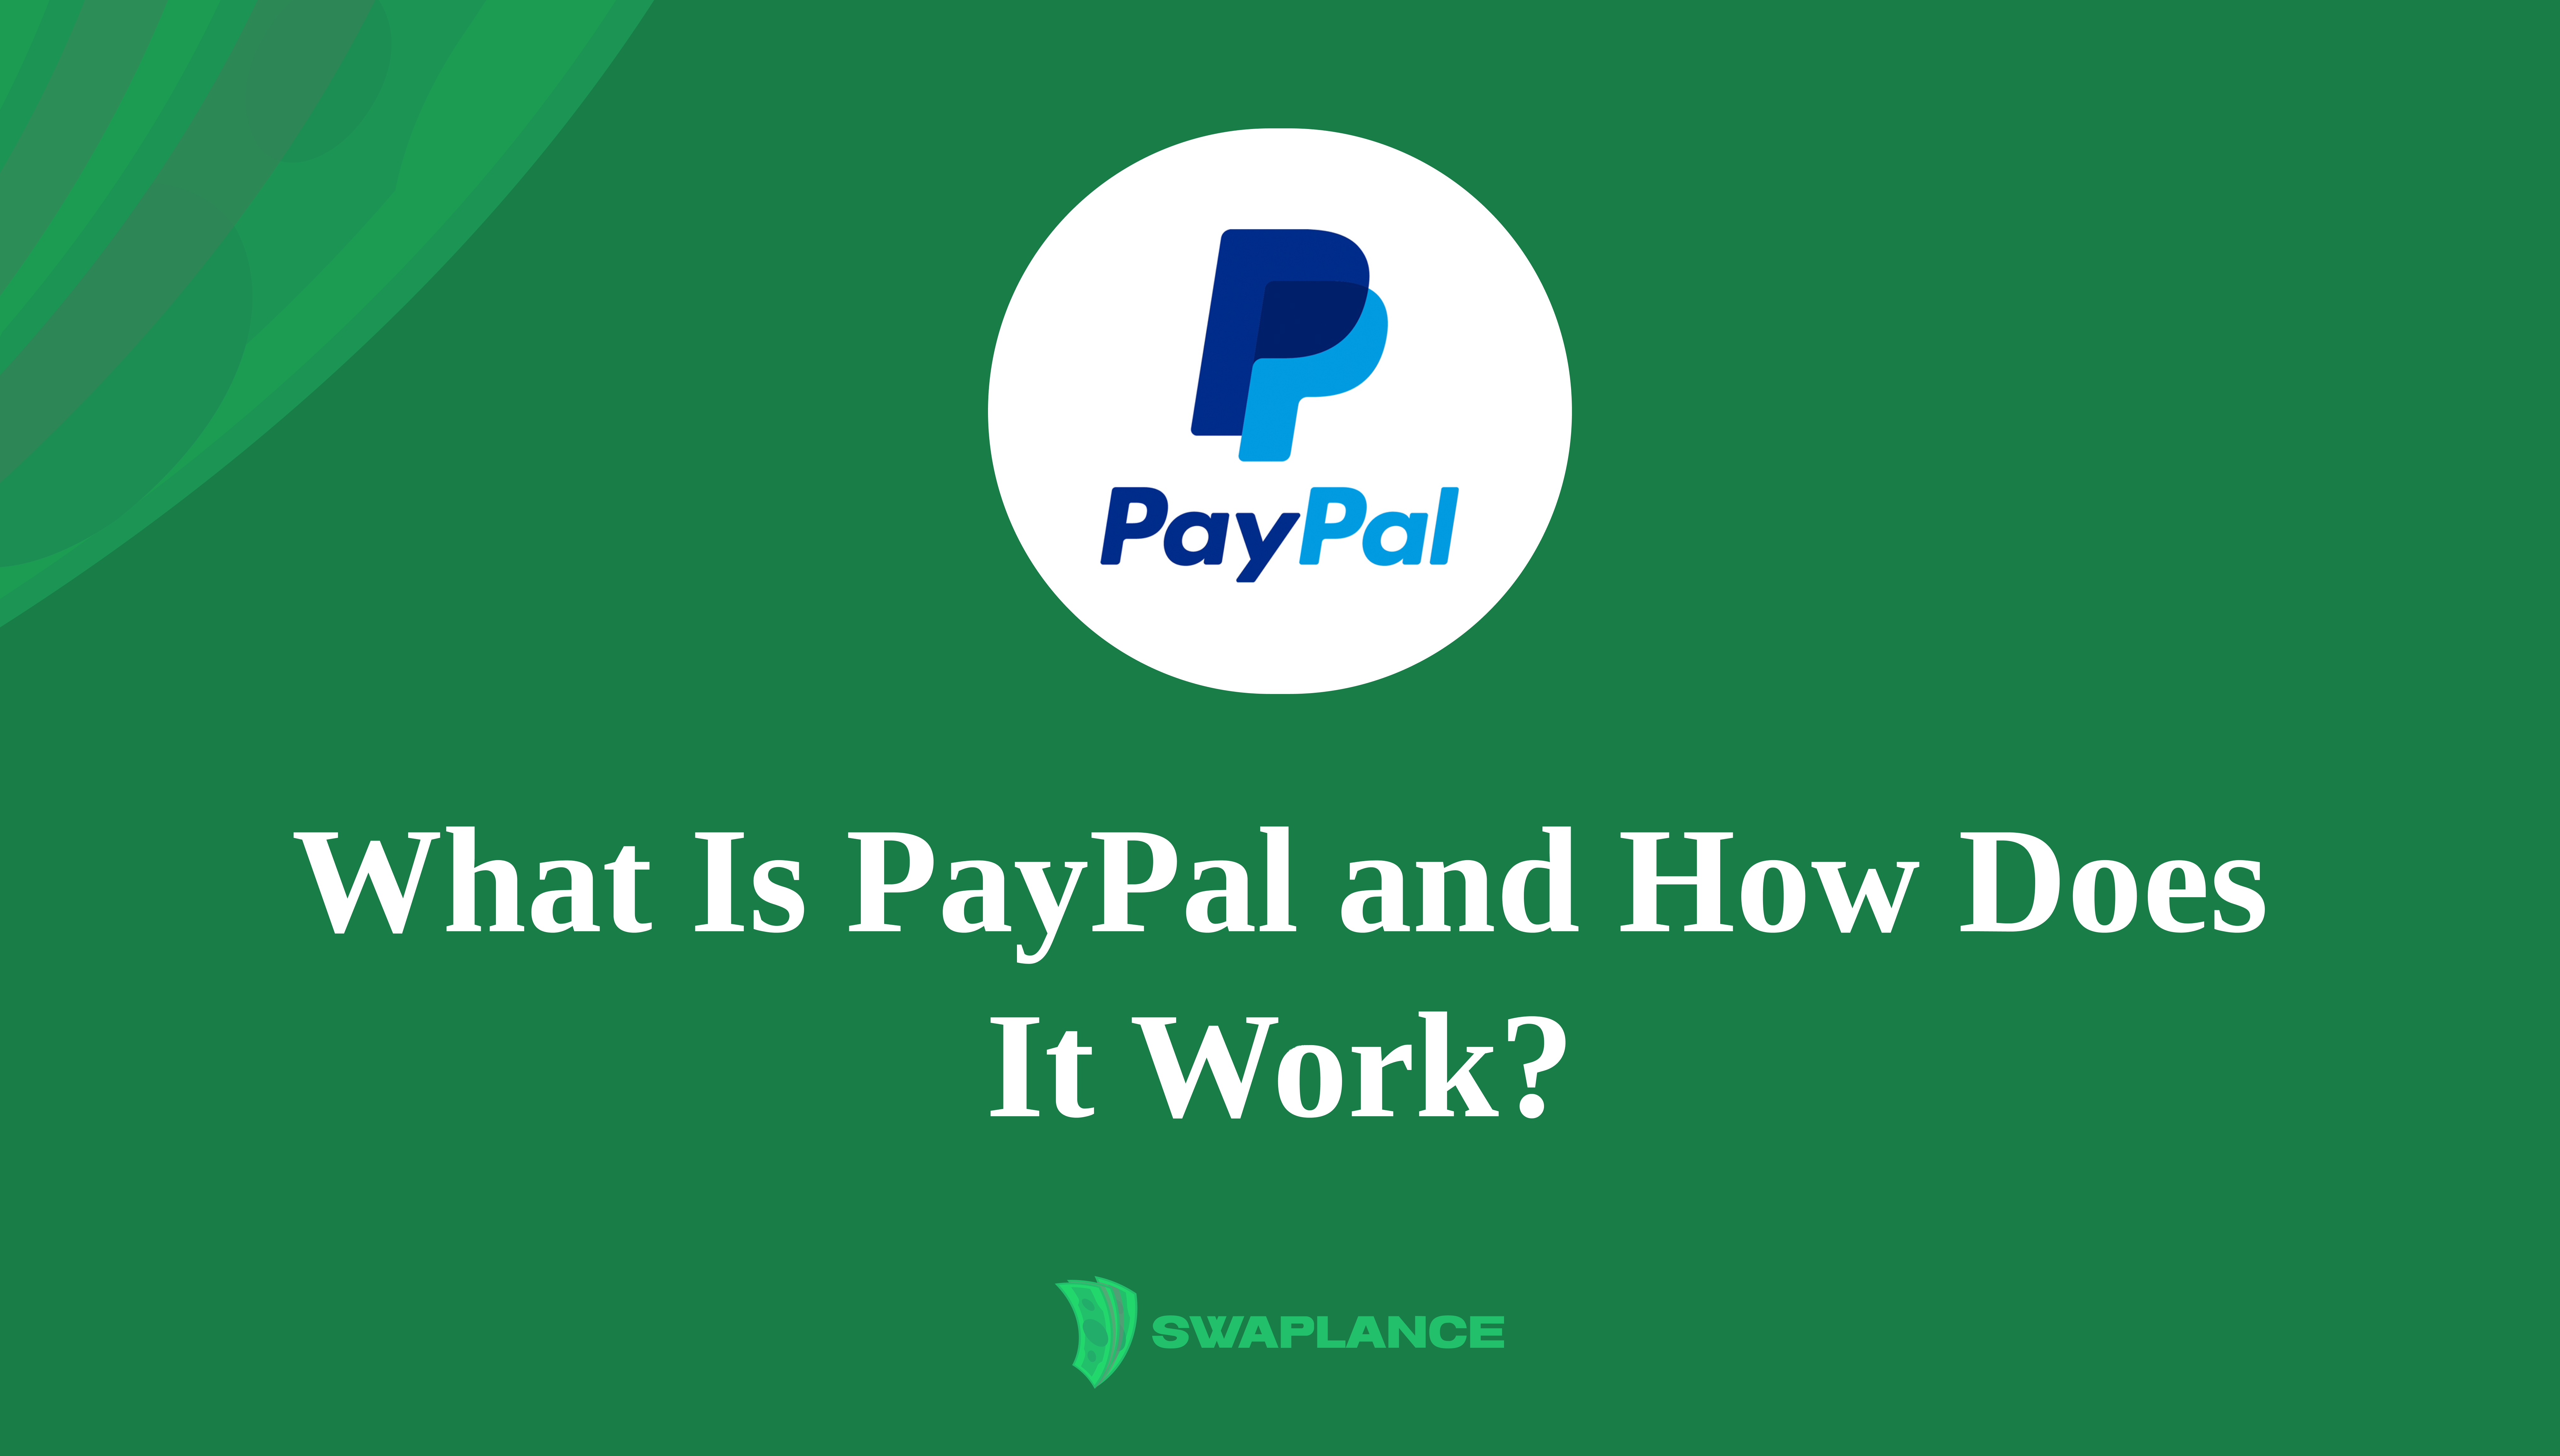 What Is PayPal and How Does It Work?